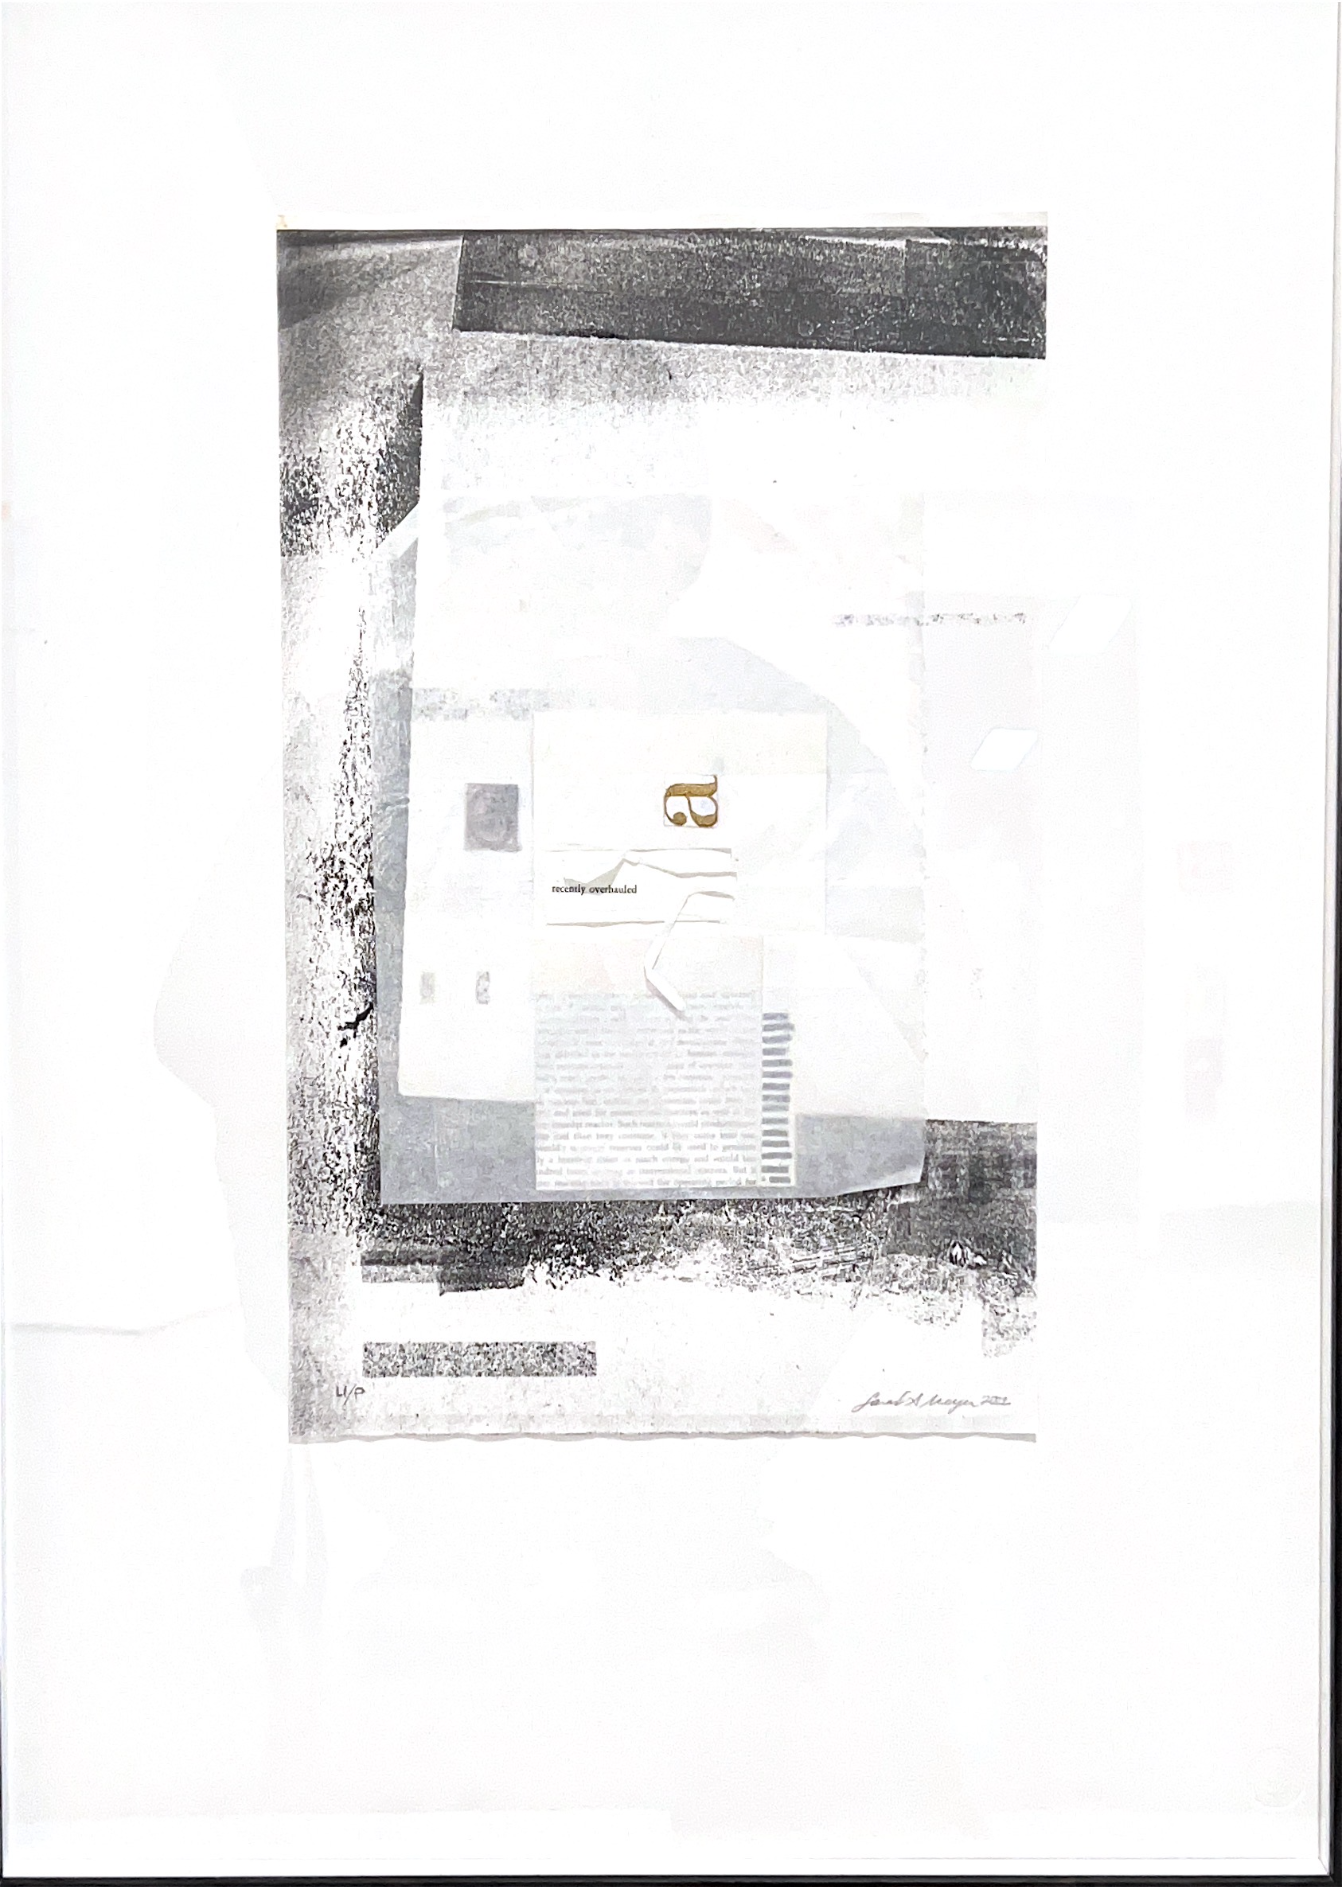 Textus Righted (no. 36) image description: Black and white collage of papers and text